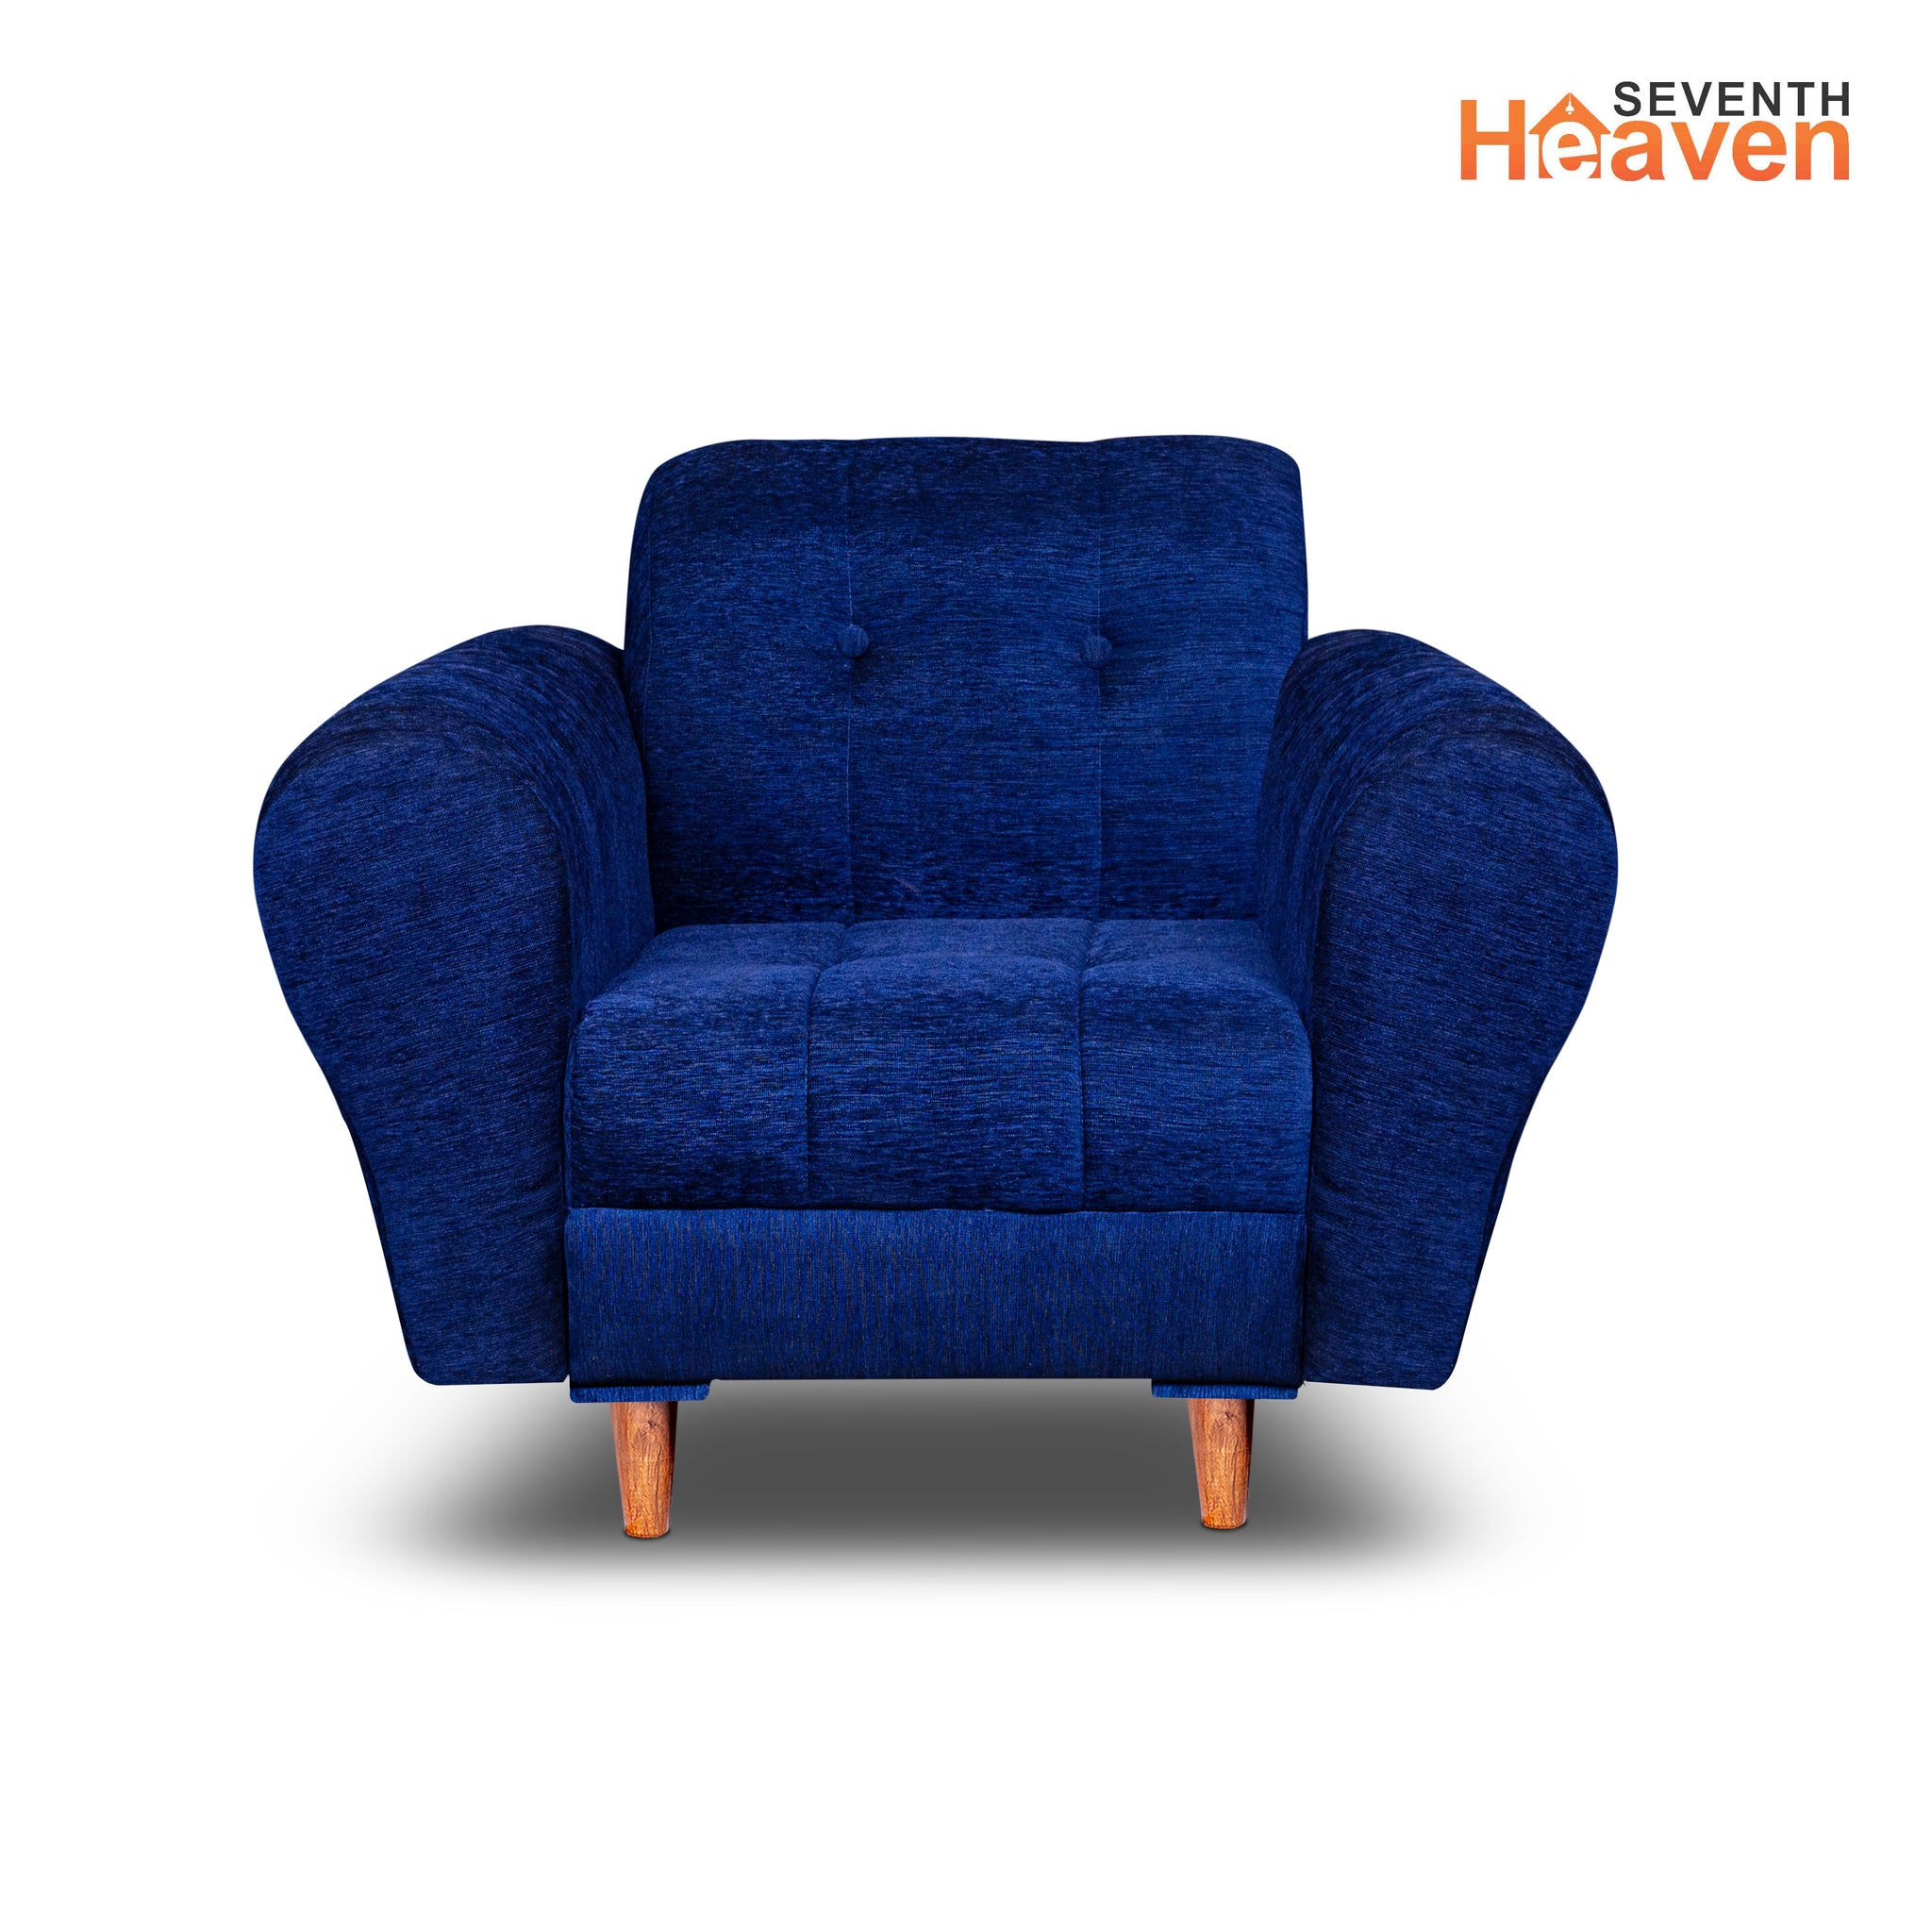 Seventh Heaven Milan 1 Seater Wooden Sofa Set Modern & Elegant Smart Furniture Range for luxurious homes, living rooms and offices. Blue Colour Molphino fabric with sheesham polished wooden legs.